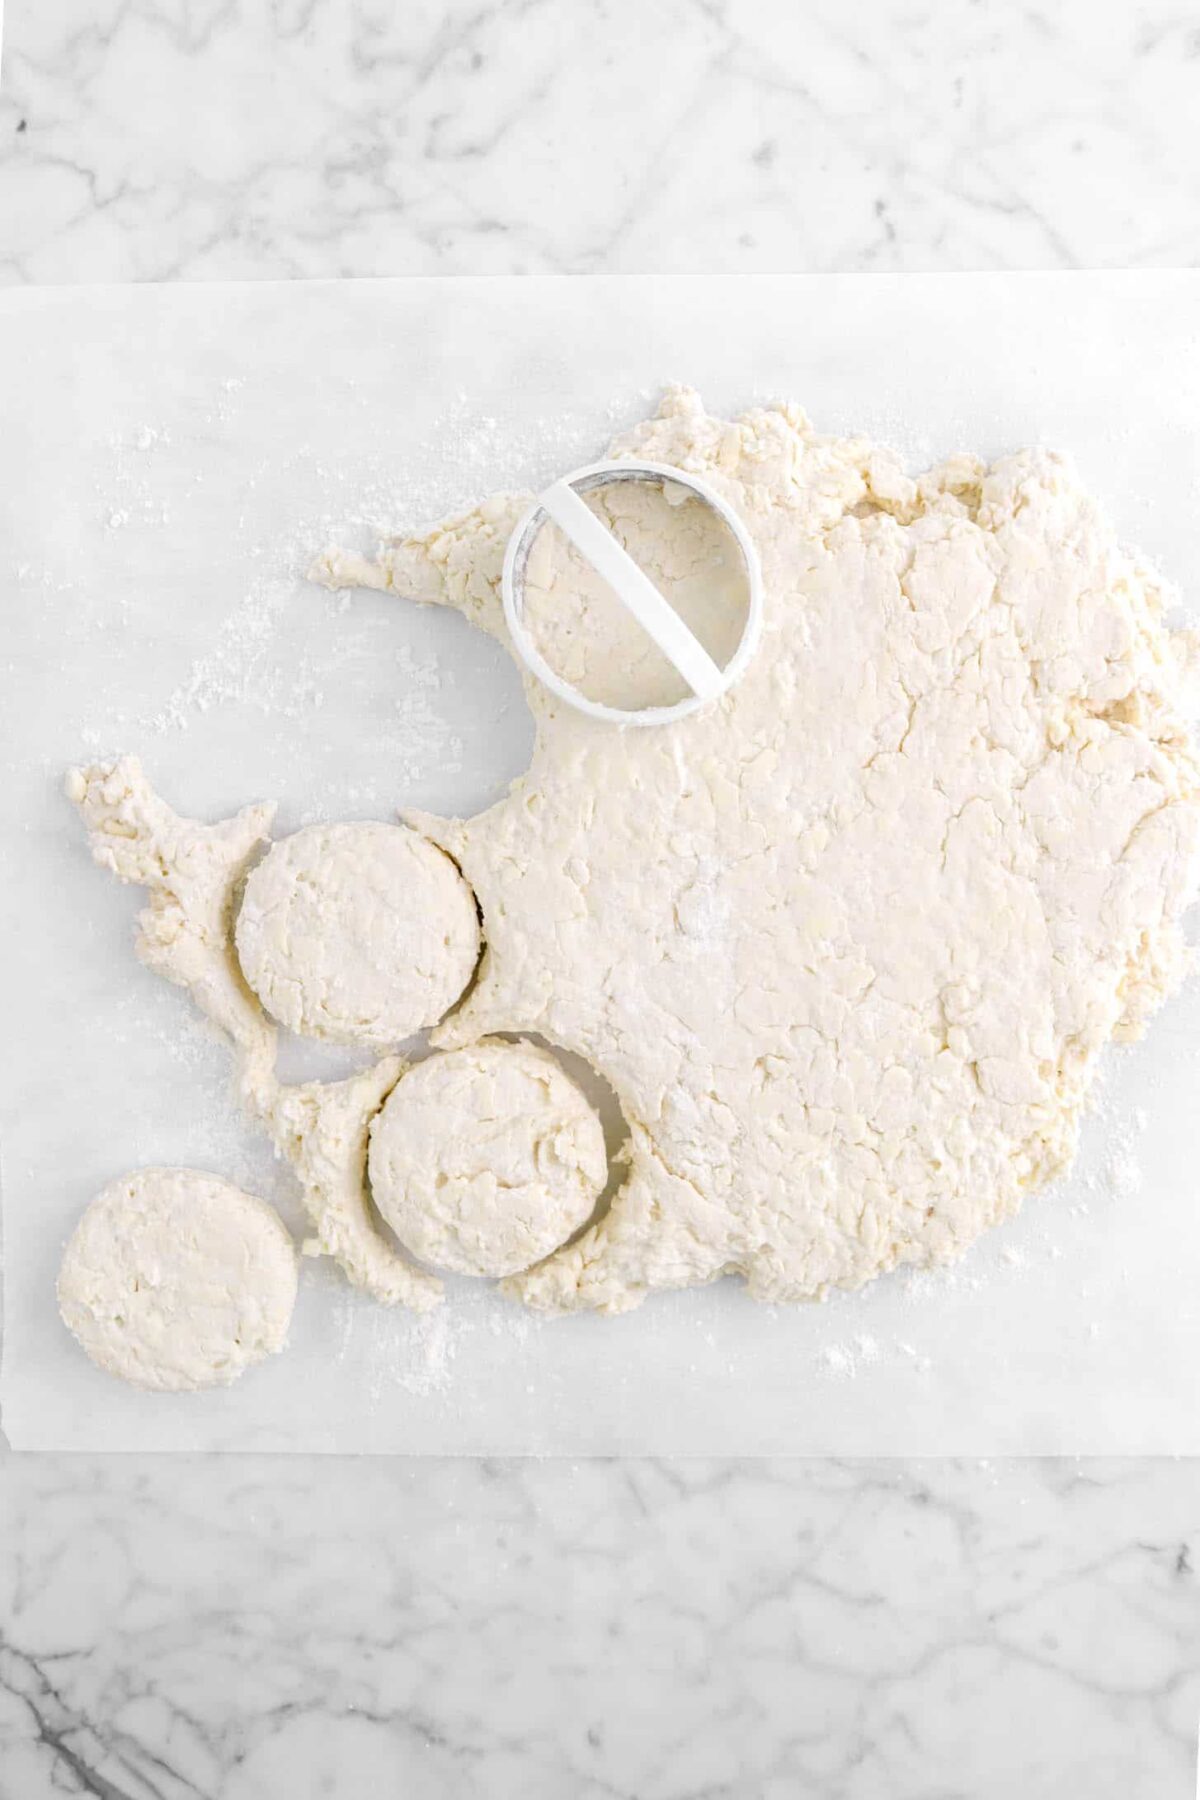 biscuit dough being cut into circles